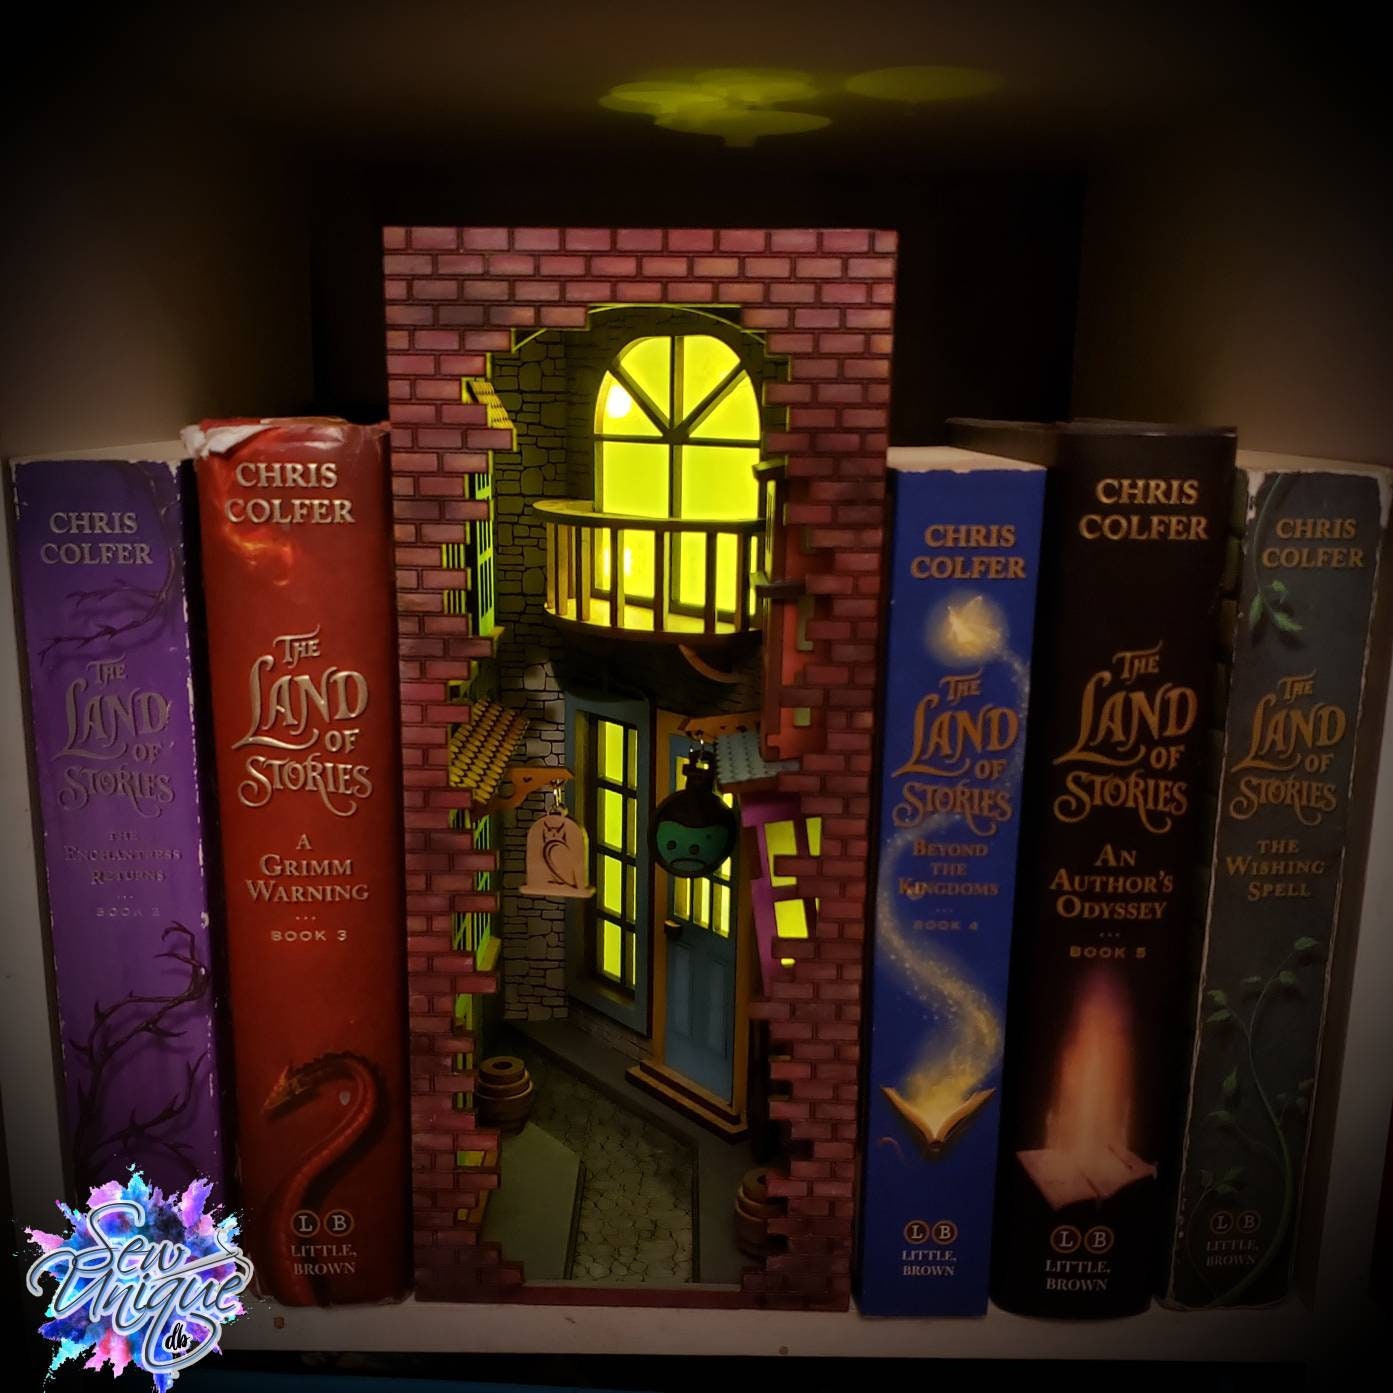 Harry Potter's Room Book Nook – Woody.Puzzle